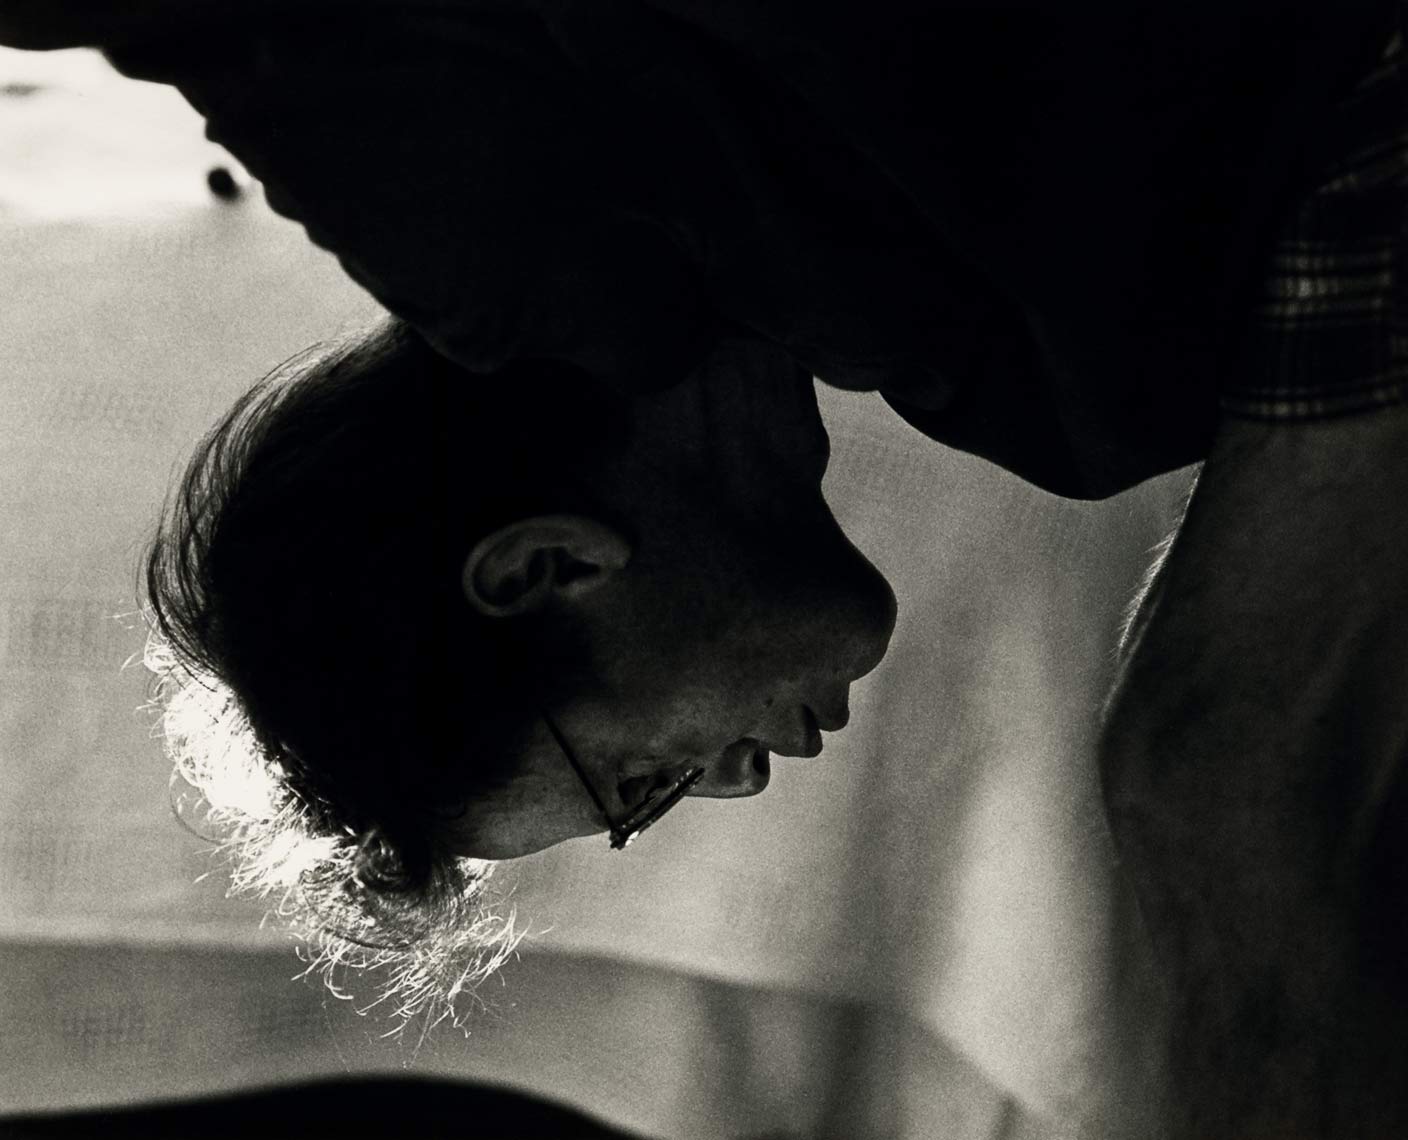 David Lebe; Morning Ritual 31, 1994, black and white photograph about living with AIDS